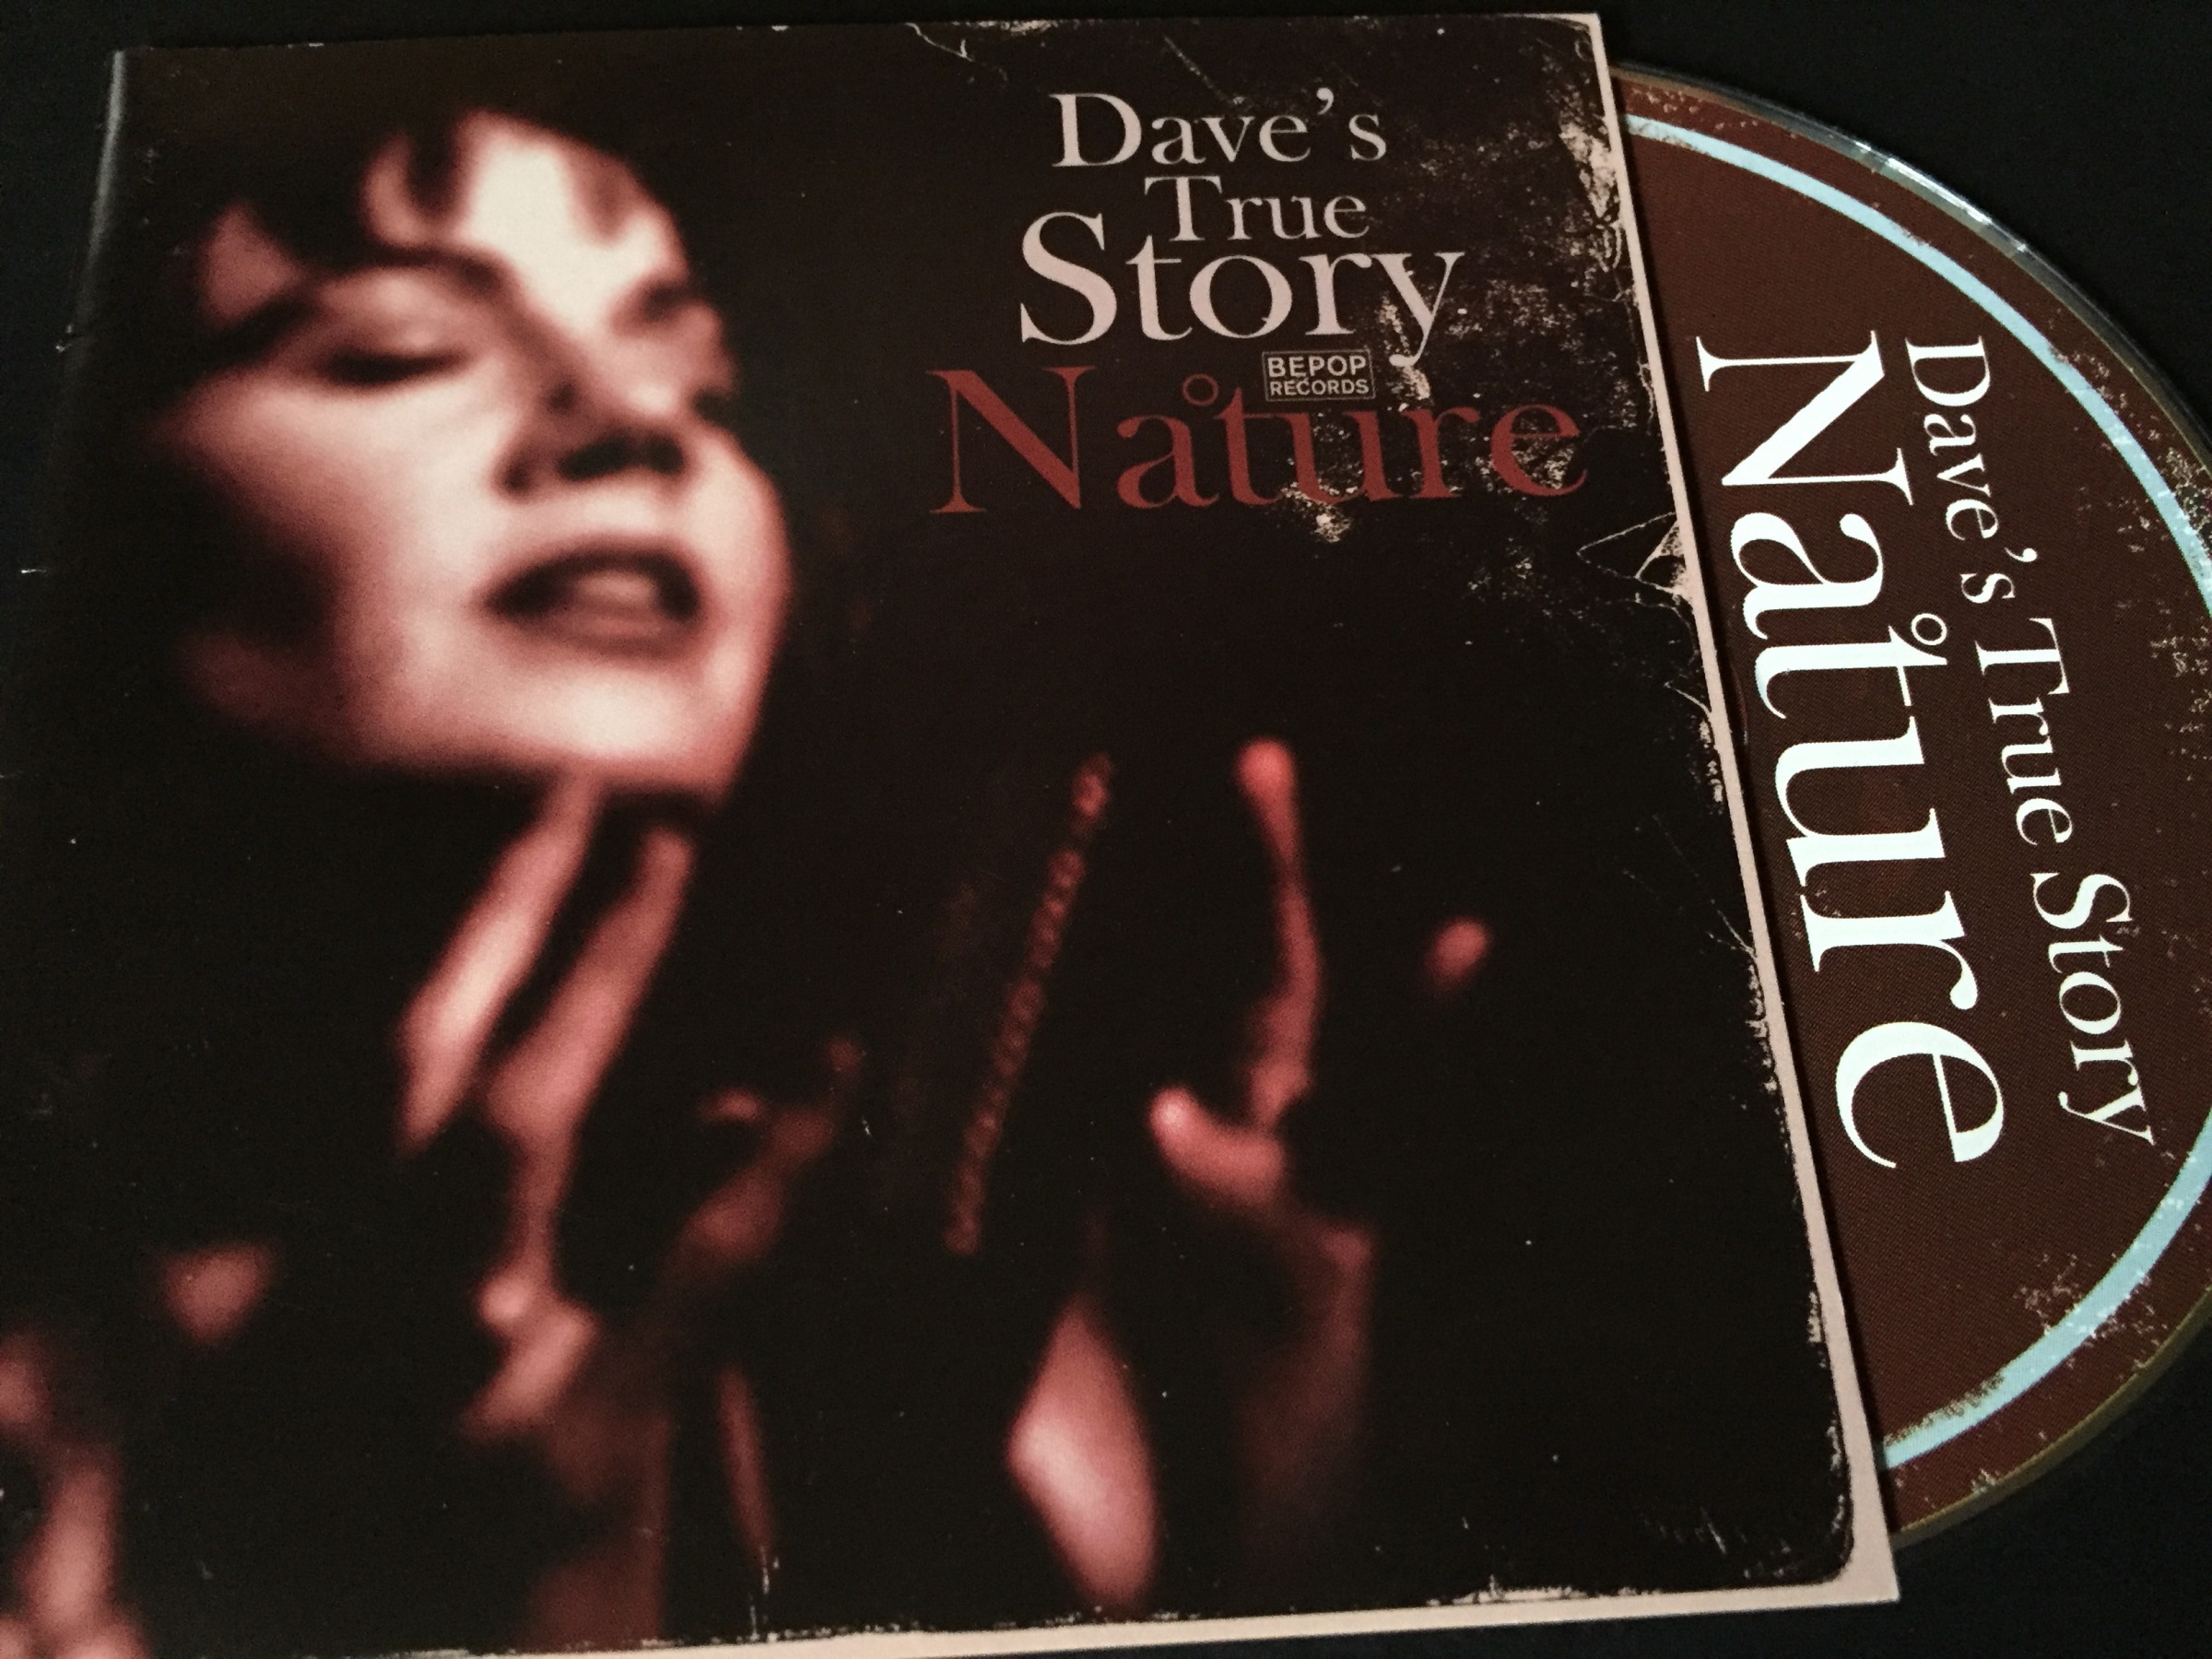 Dave S True Story Nature 日々jazz的な生活